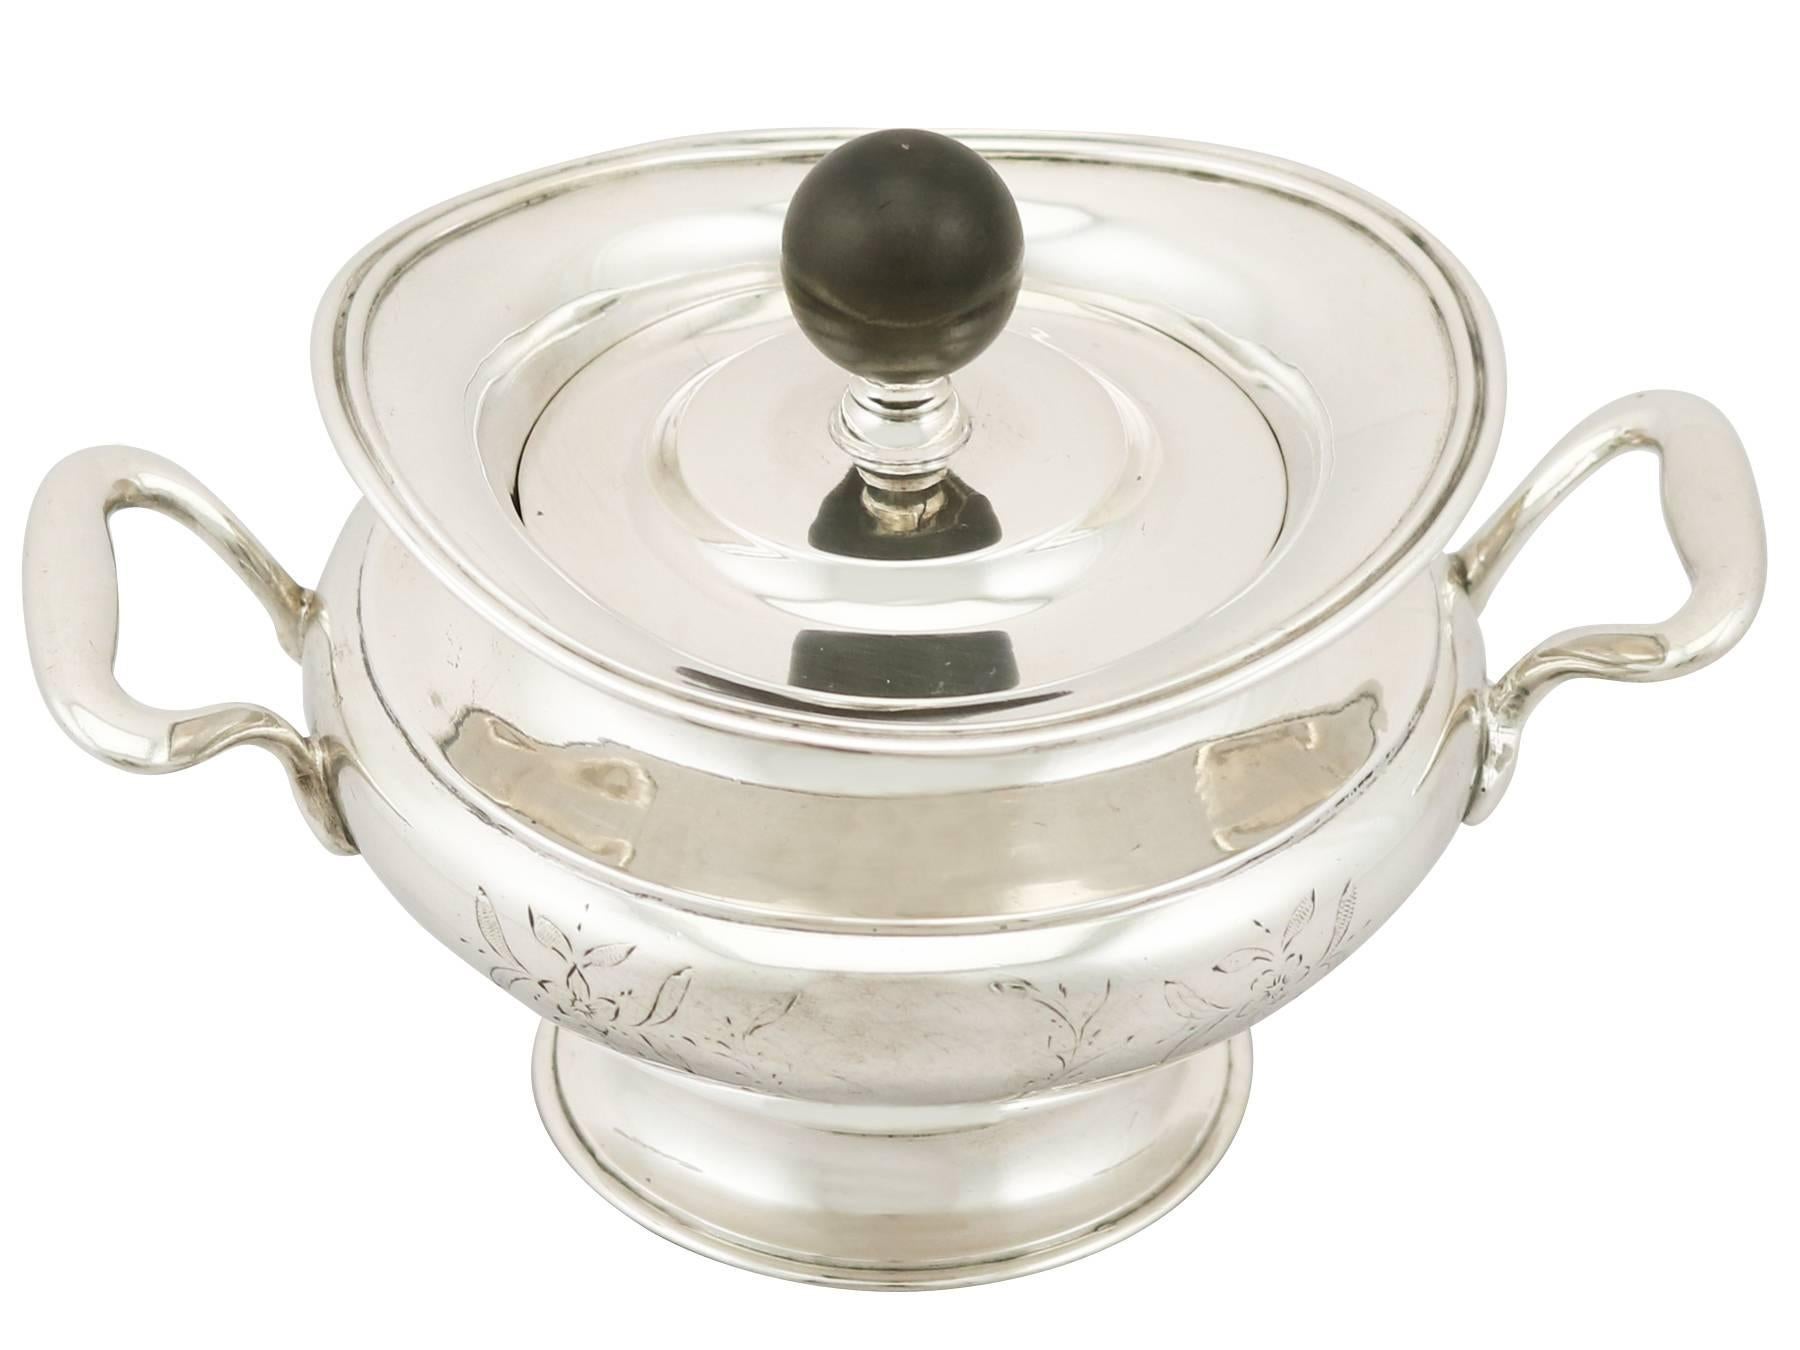 A fine and impressive antique Russian silver sugar bowl and cover; an addition to our diverse silver teaware collection

This impressive antique Russian silver sugar bowl has an oval rounded form onto a spreading foot.

The surface of the